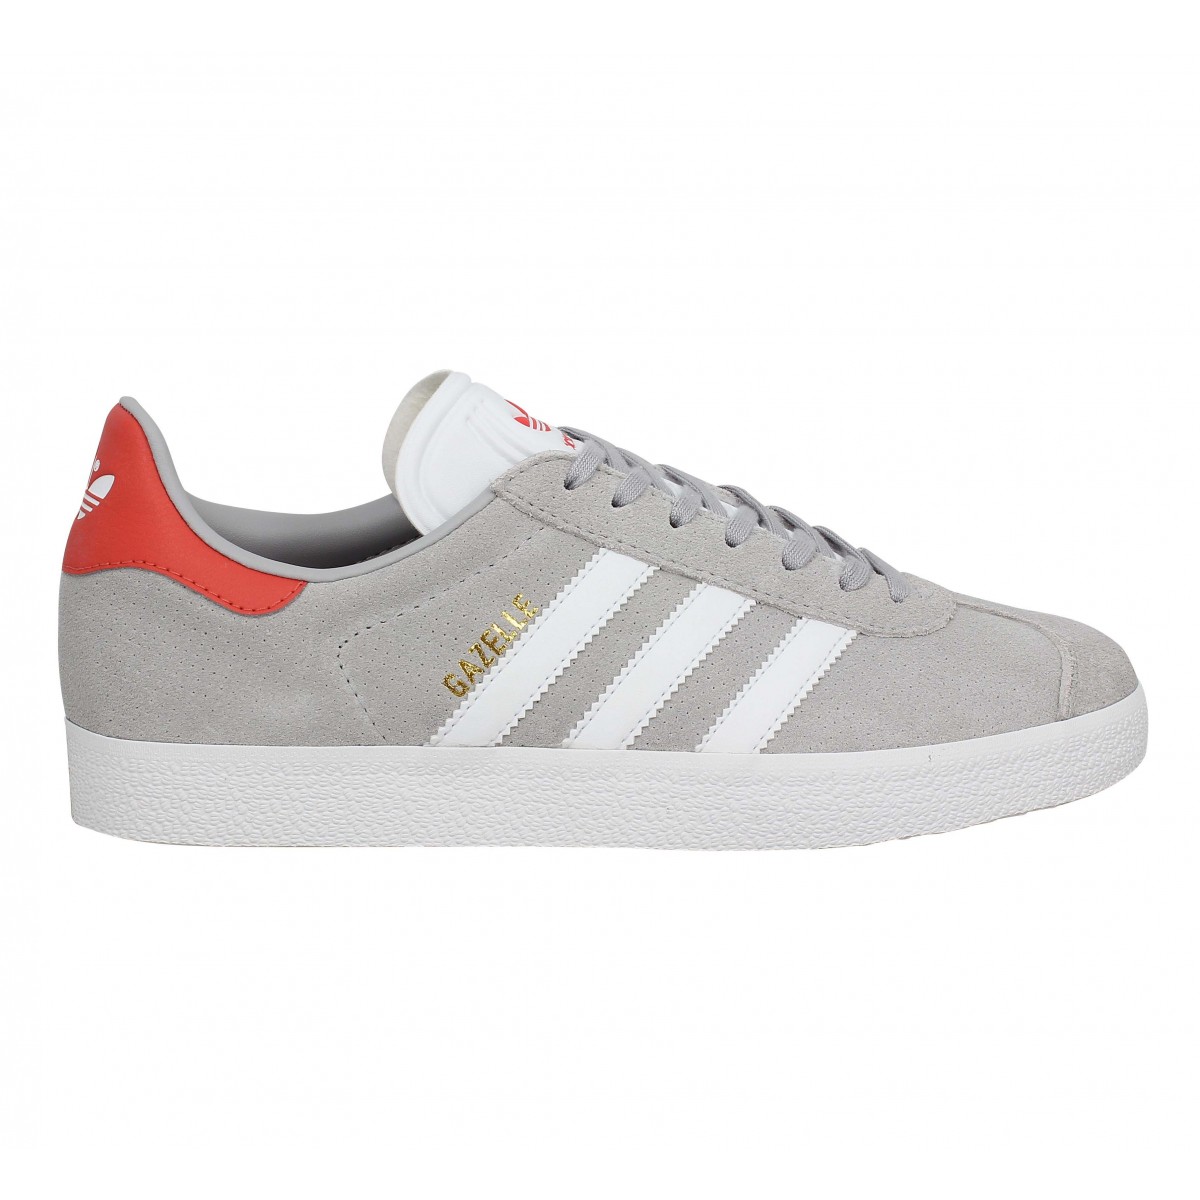 Chaussures Adidas gazelle velours homme gris rouge homme | Fanny ...